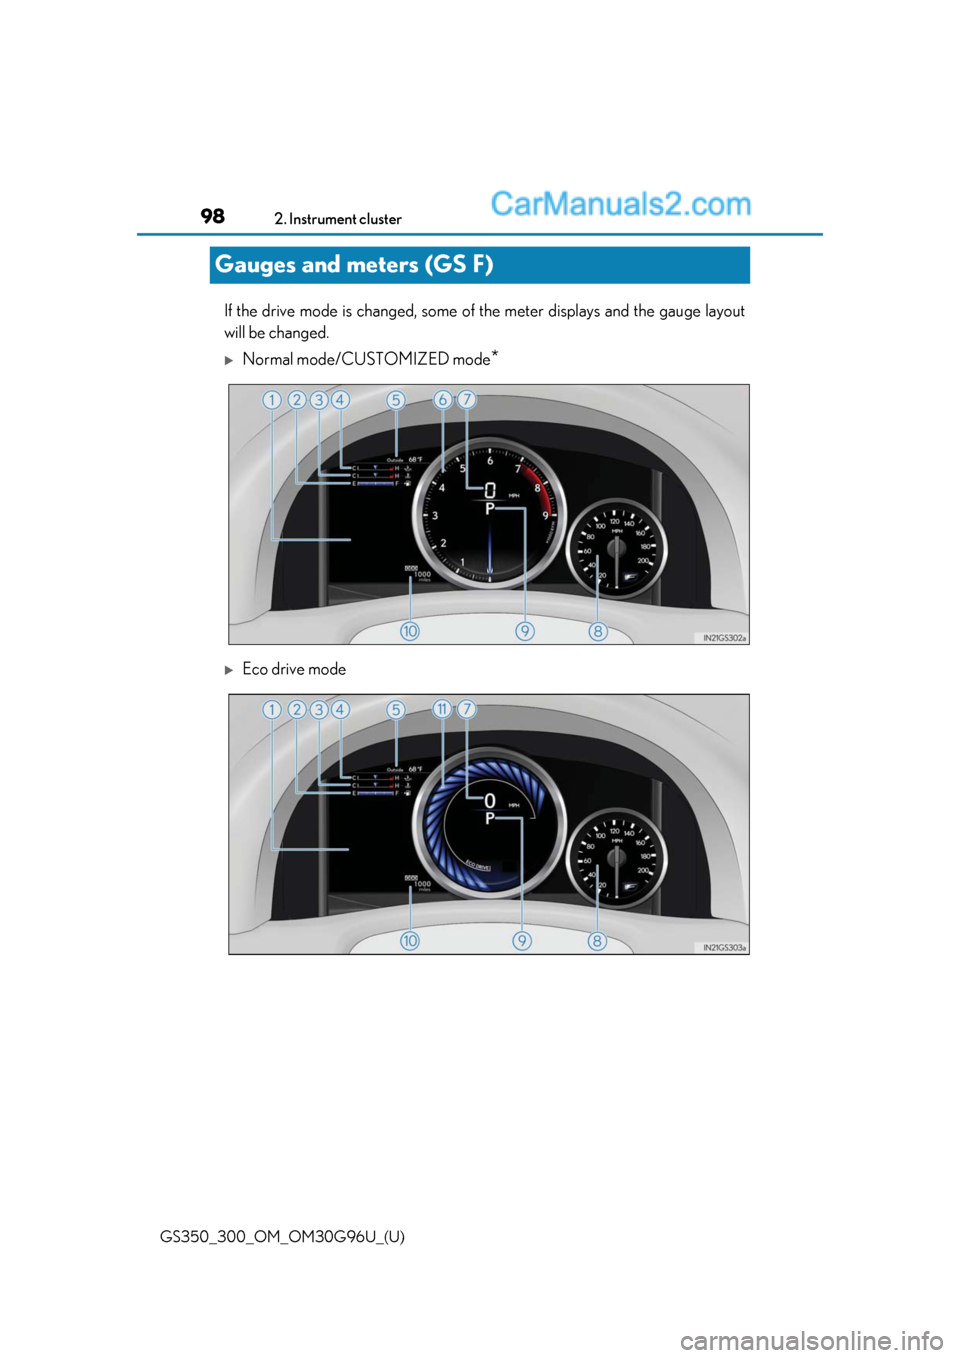 Lexus GS300 2019 Owners Manual 98
GS350_300_OM_OM30G96U_(U)2. Instrument cluster
Gauges and meters (GS F)
If the drive mode is changed, some of
 the meter displays and the gauge layout
will be changed.
Normal mode/CUSTOMIZED mod